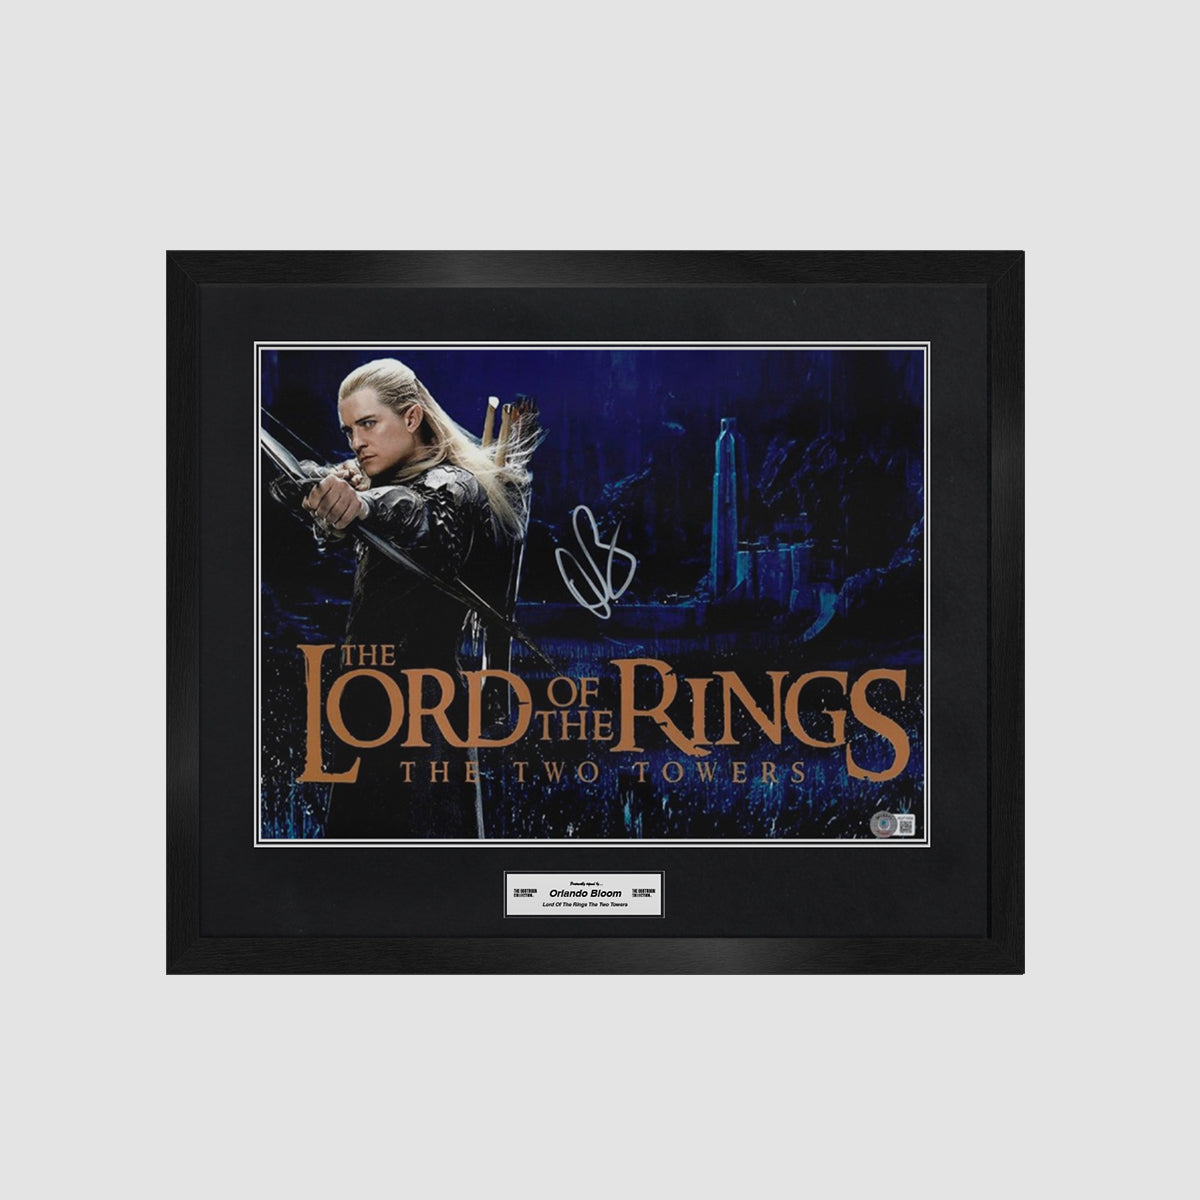 Orlando Bloom Signed Lord Of The Rings Photo - The Two Towers